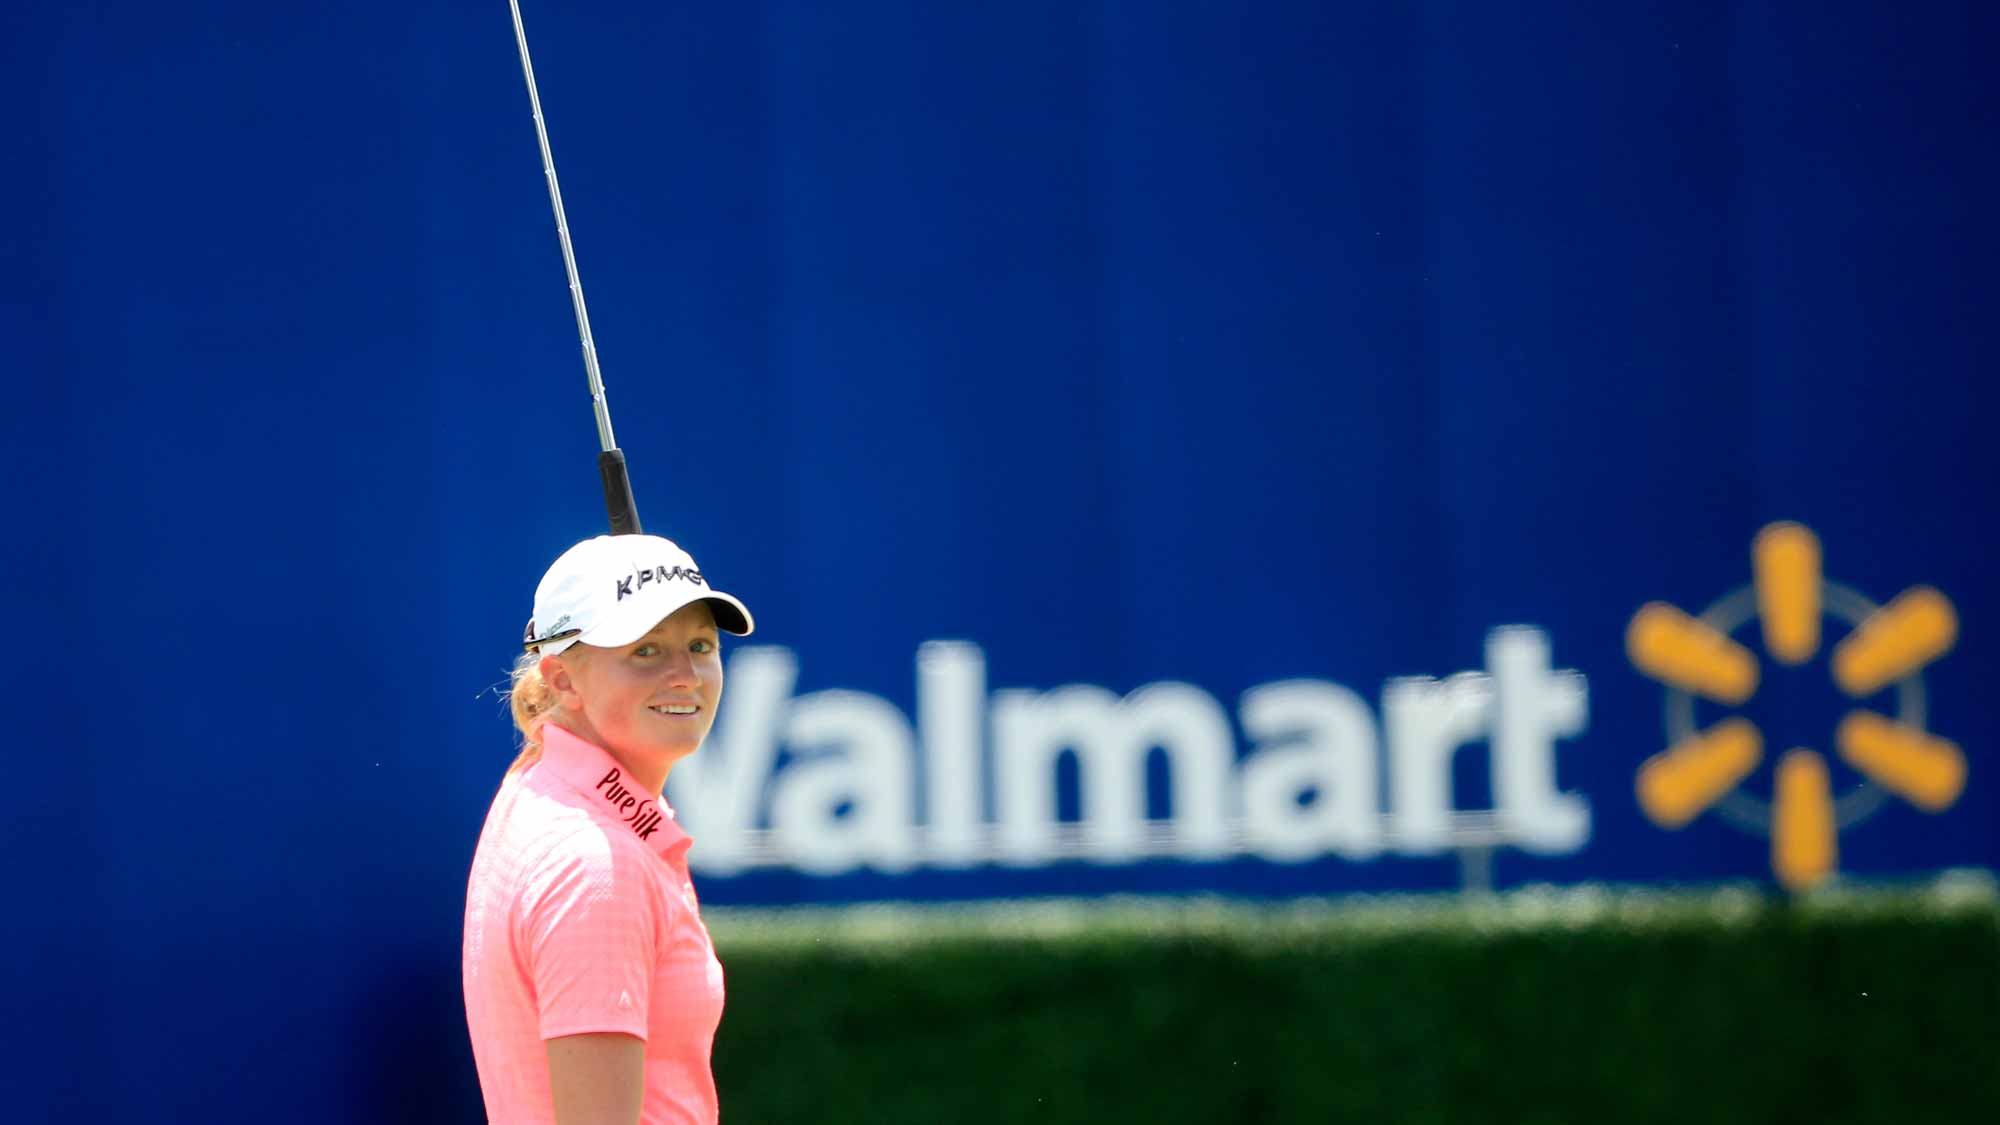 Stacy Lewis of the United States reacts to a birdie on the 17th hole during the second round of the Walmart NW Arkansas Championship Presented by P&G at Pinnacle Country Club